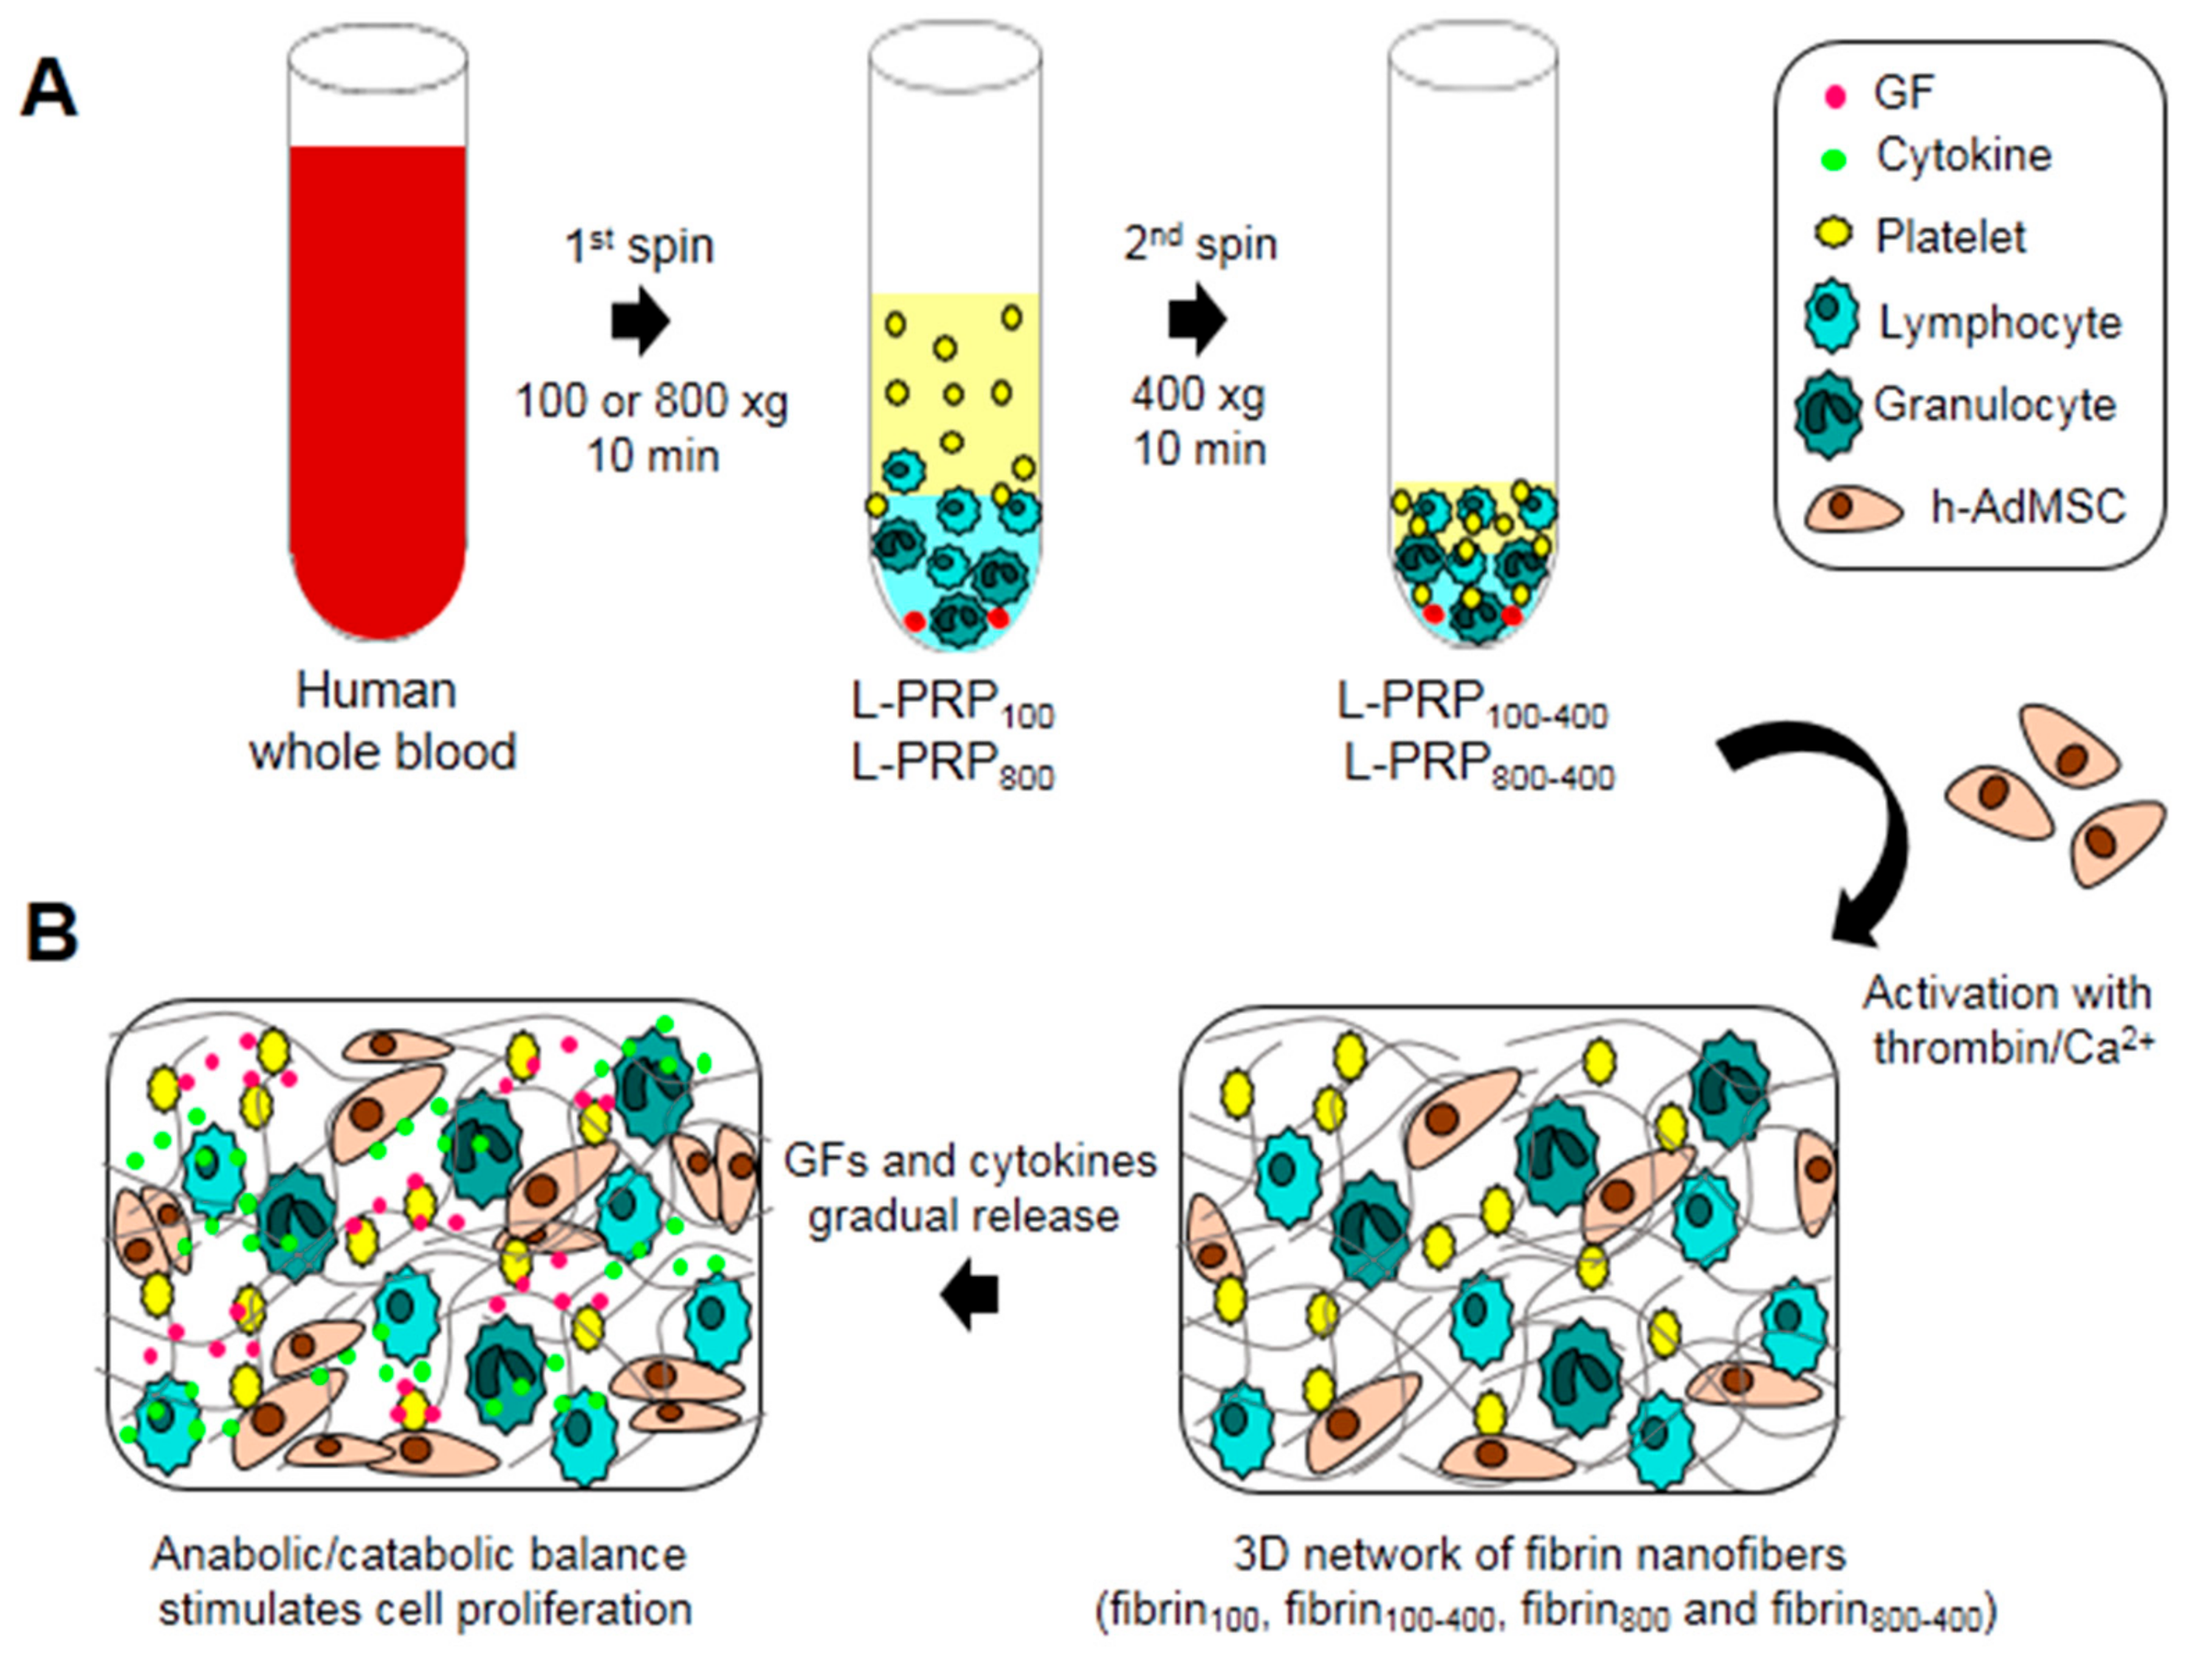 Molecules Free Full Text Centrifugation Conditions In The L Prp Preparation Affect Soluble Factors Release And Mesenchymal Stem Cell Proliferation In Fibrin Nanofibers Html